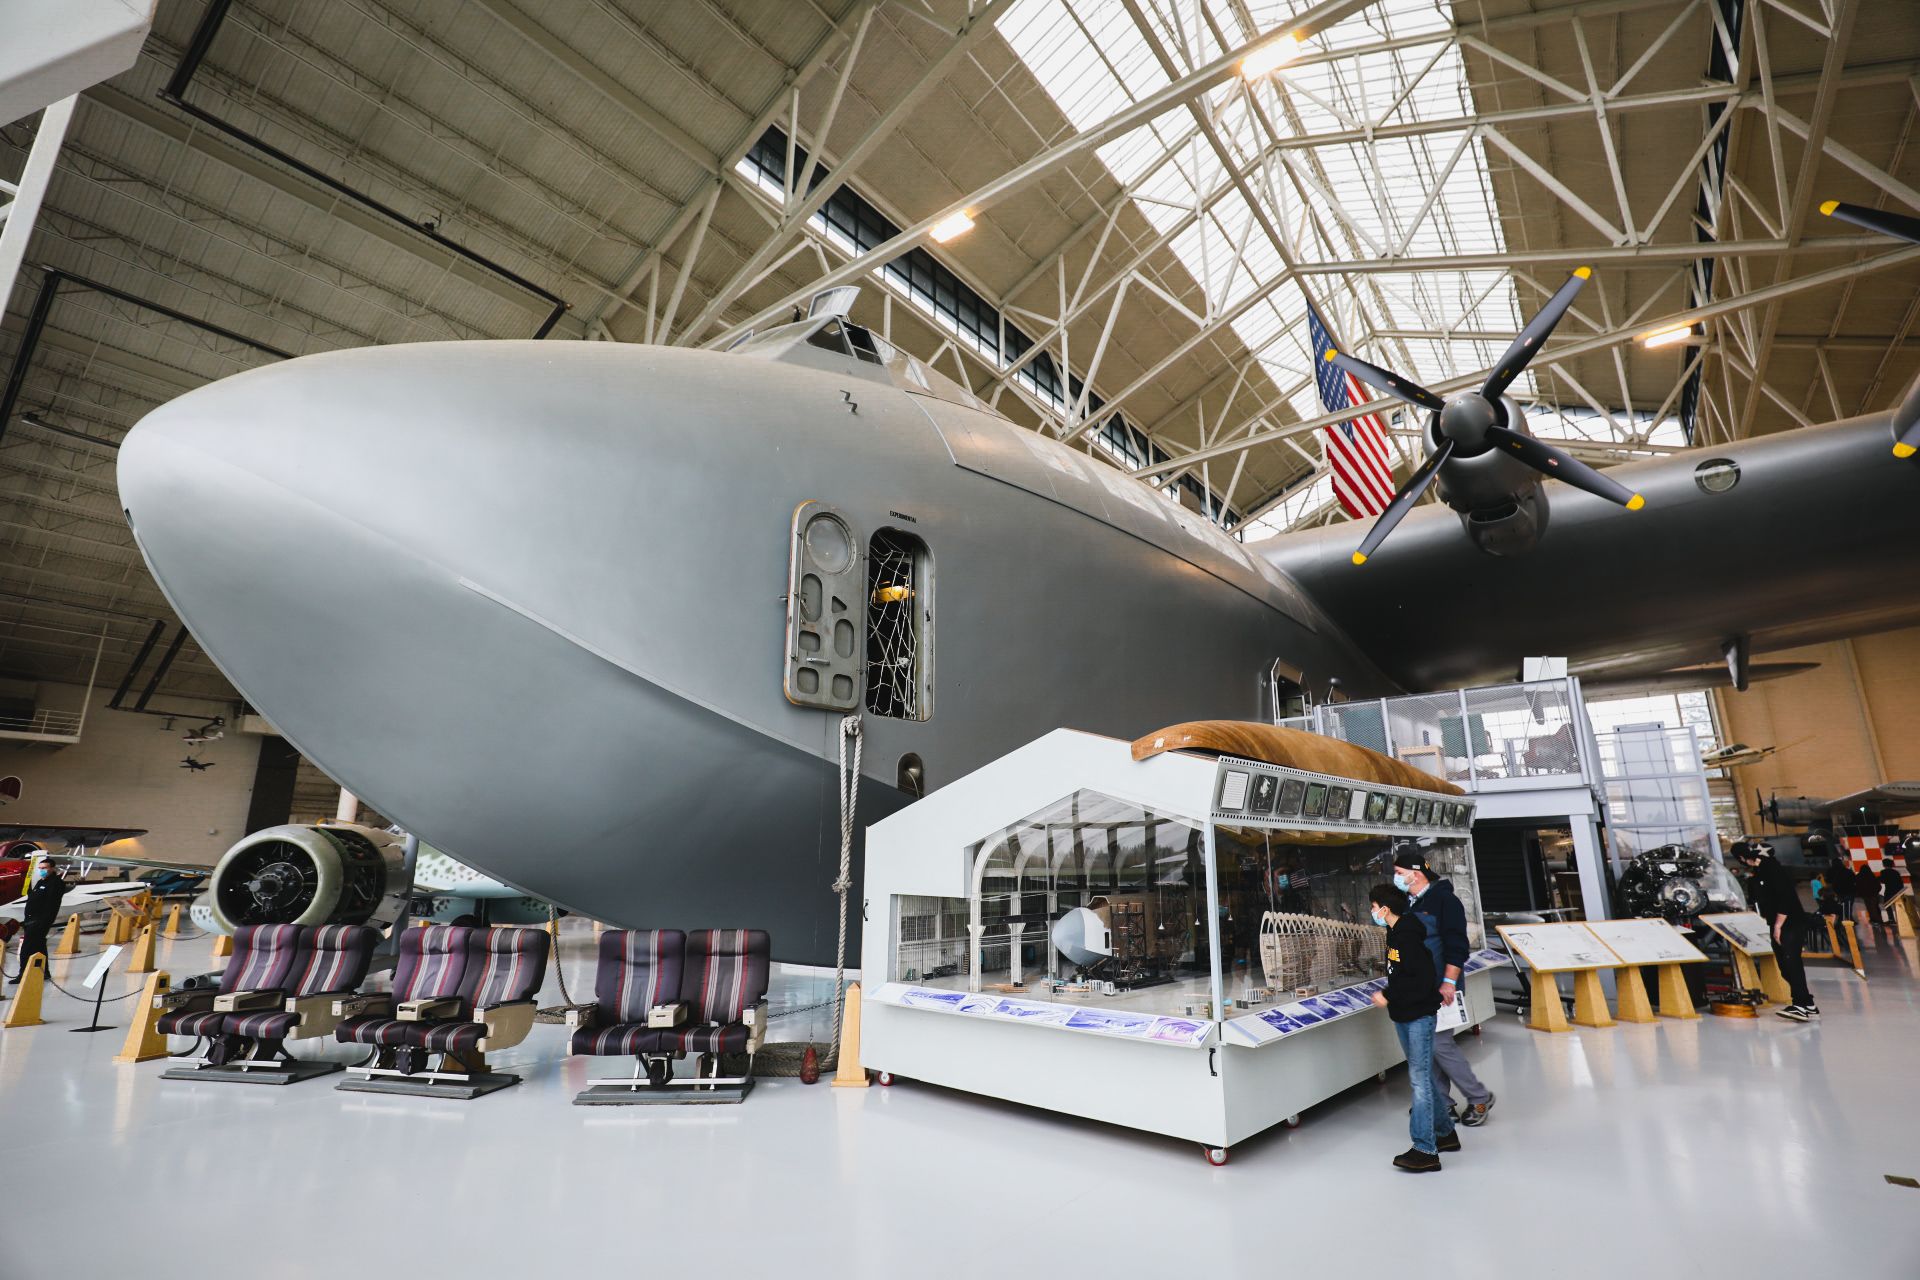 The Spruce Goose On Display At Evergreen Museum